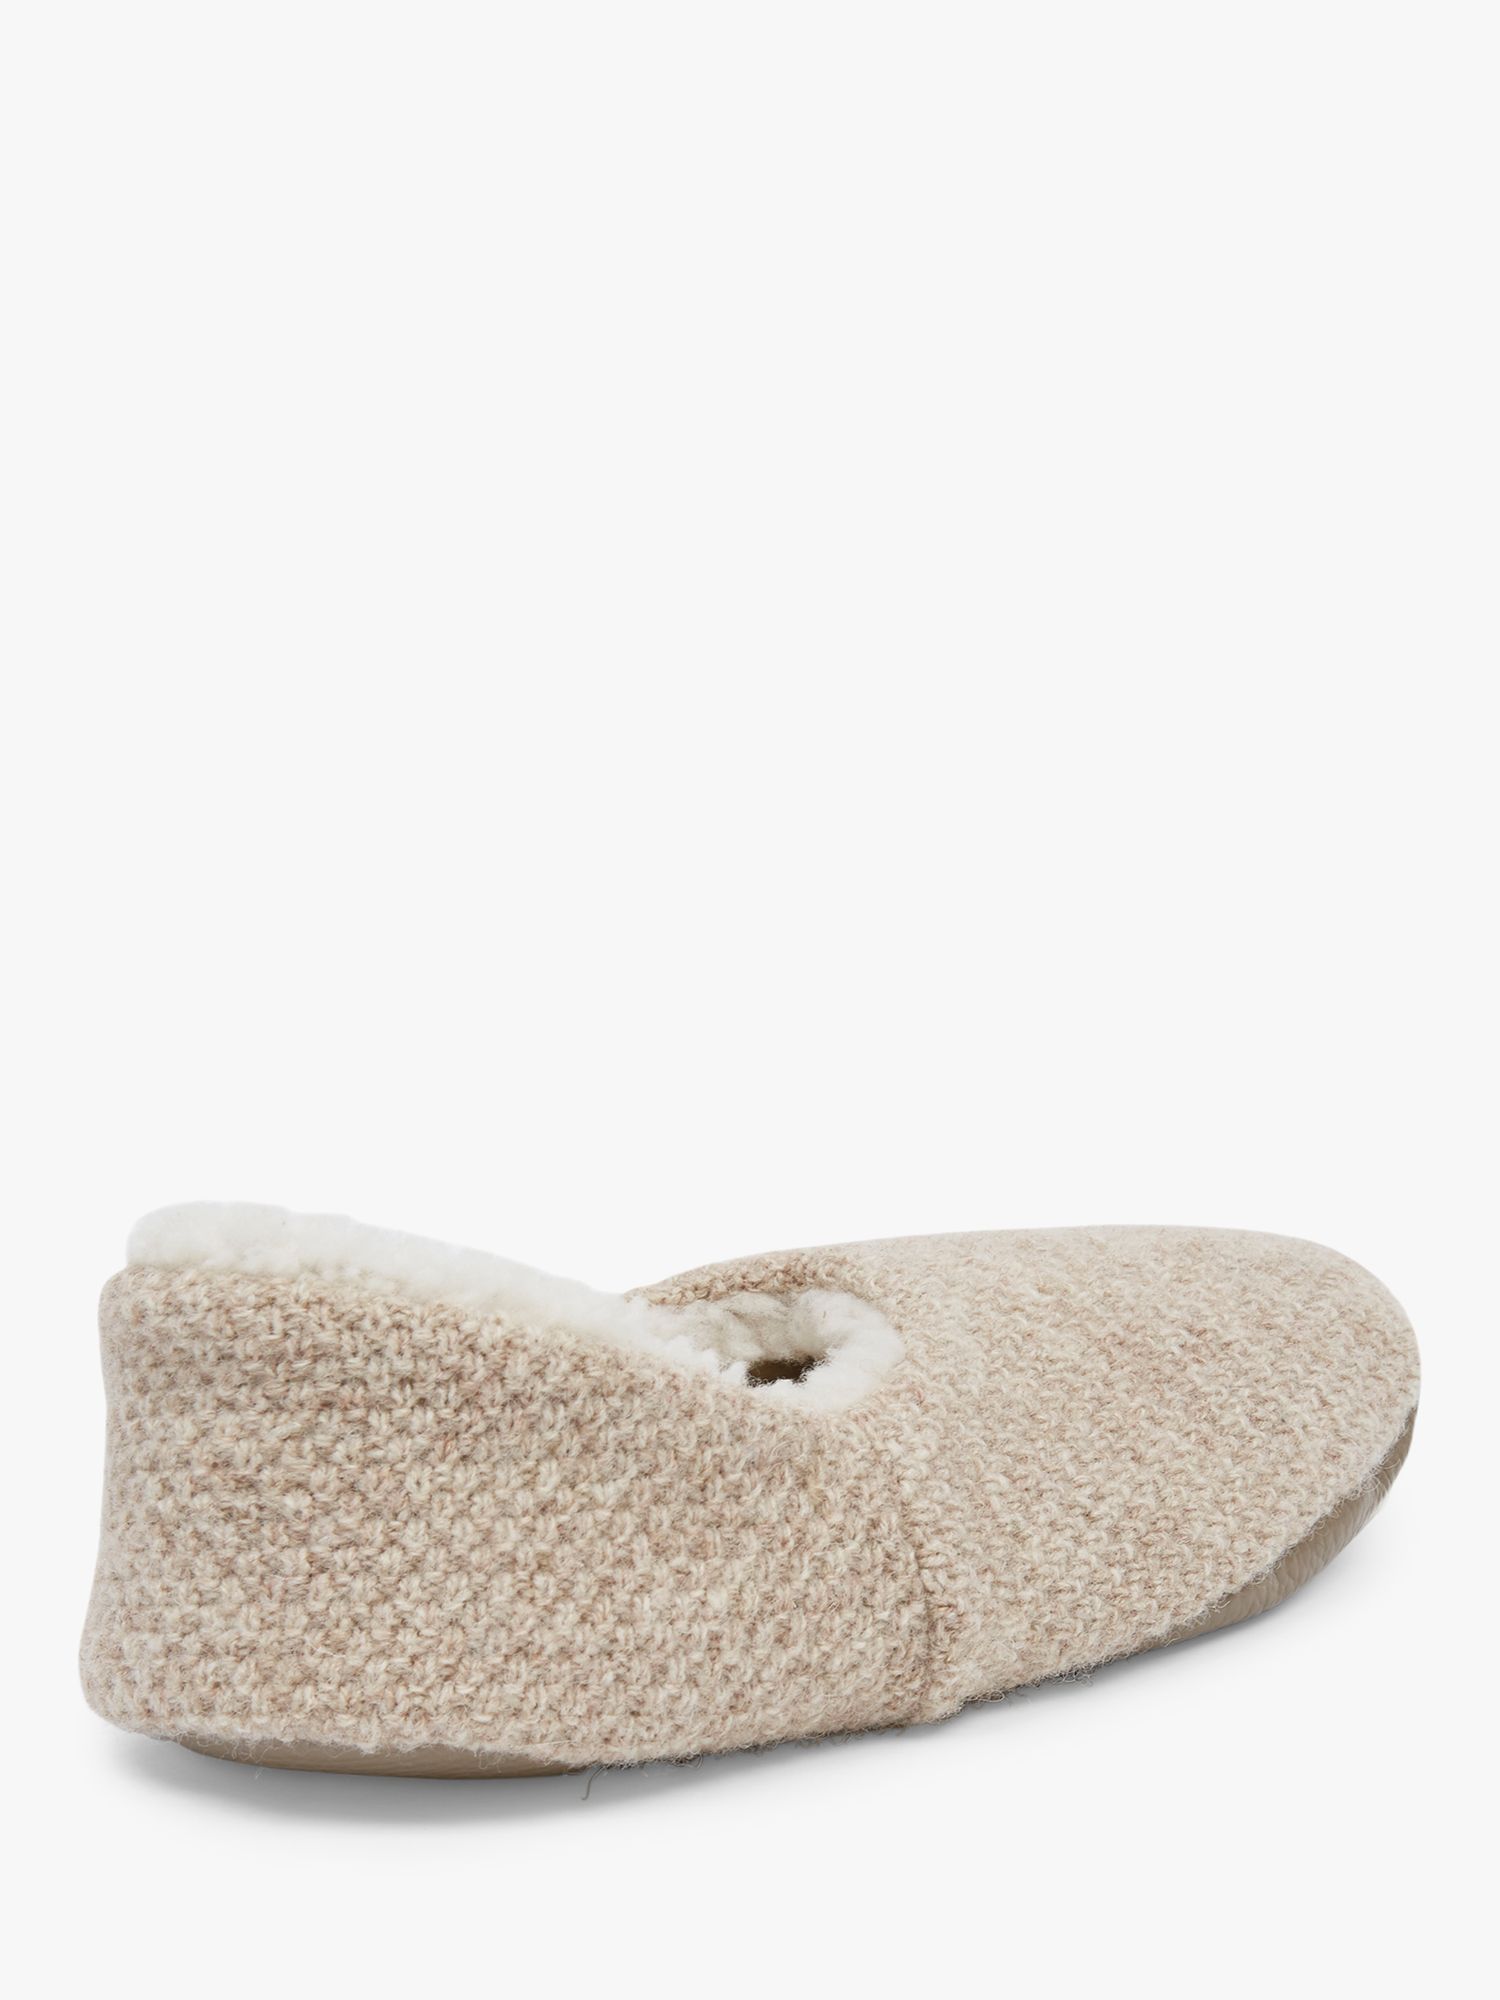 Celtic & Co. Knitted Sheepskin Cocoon Slippers, Oatmeal at John Lewis ...